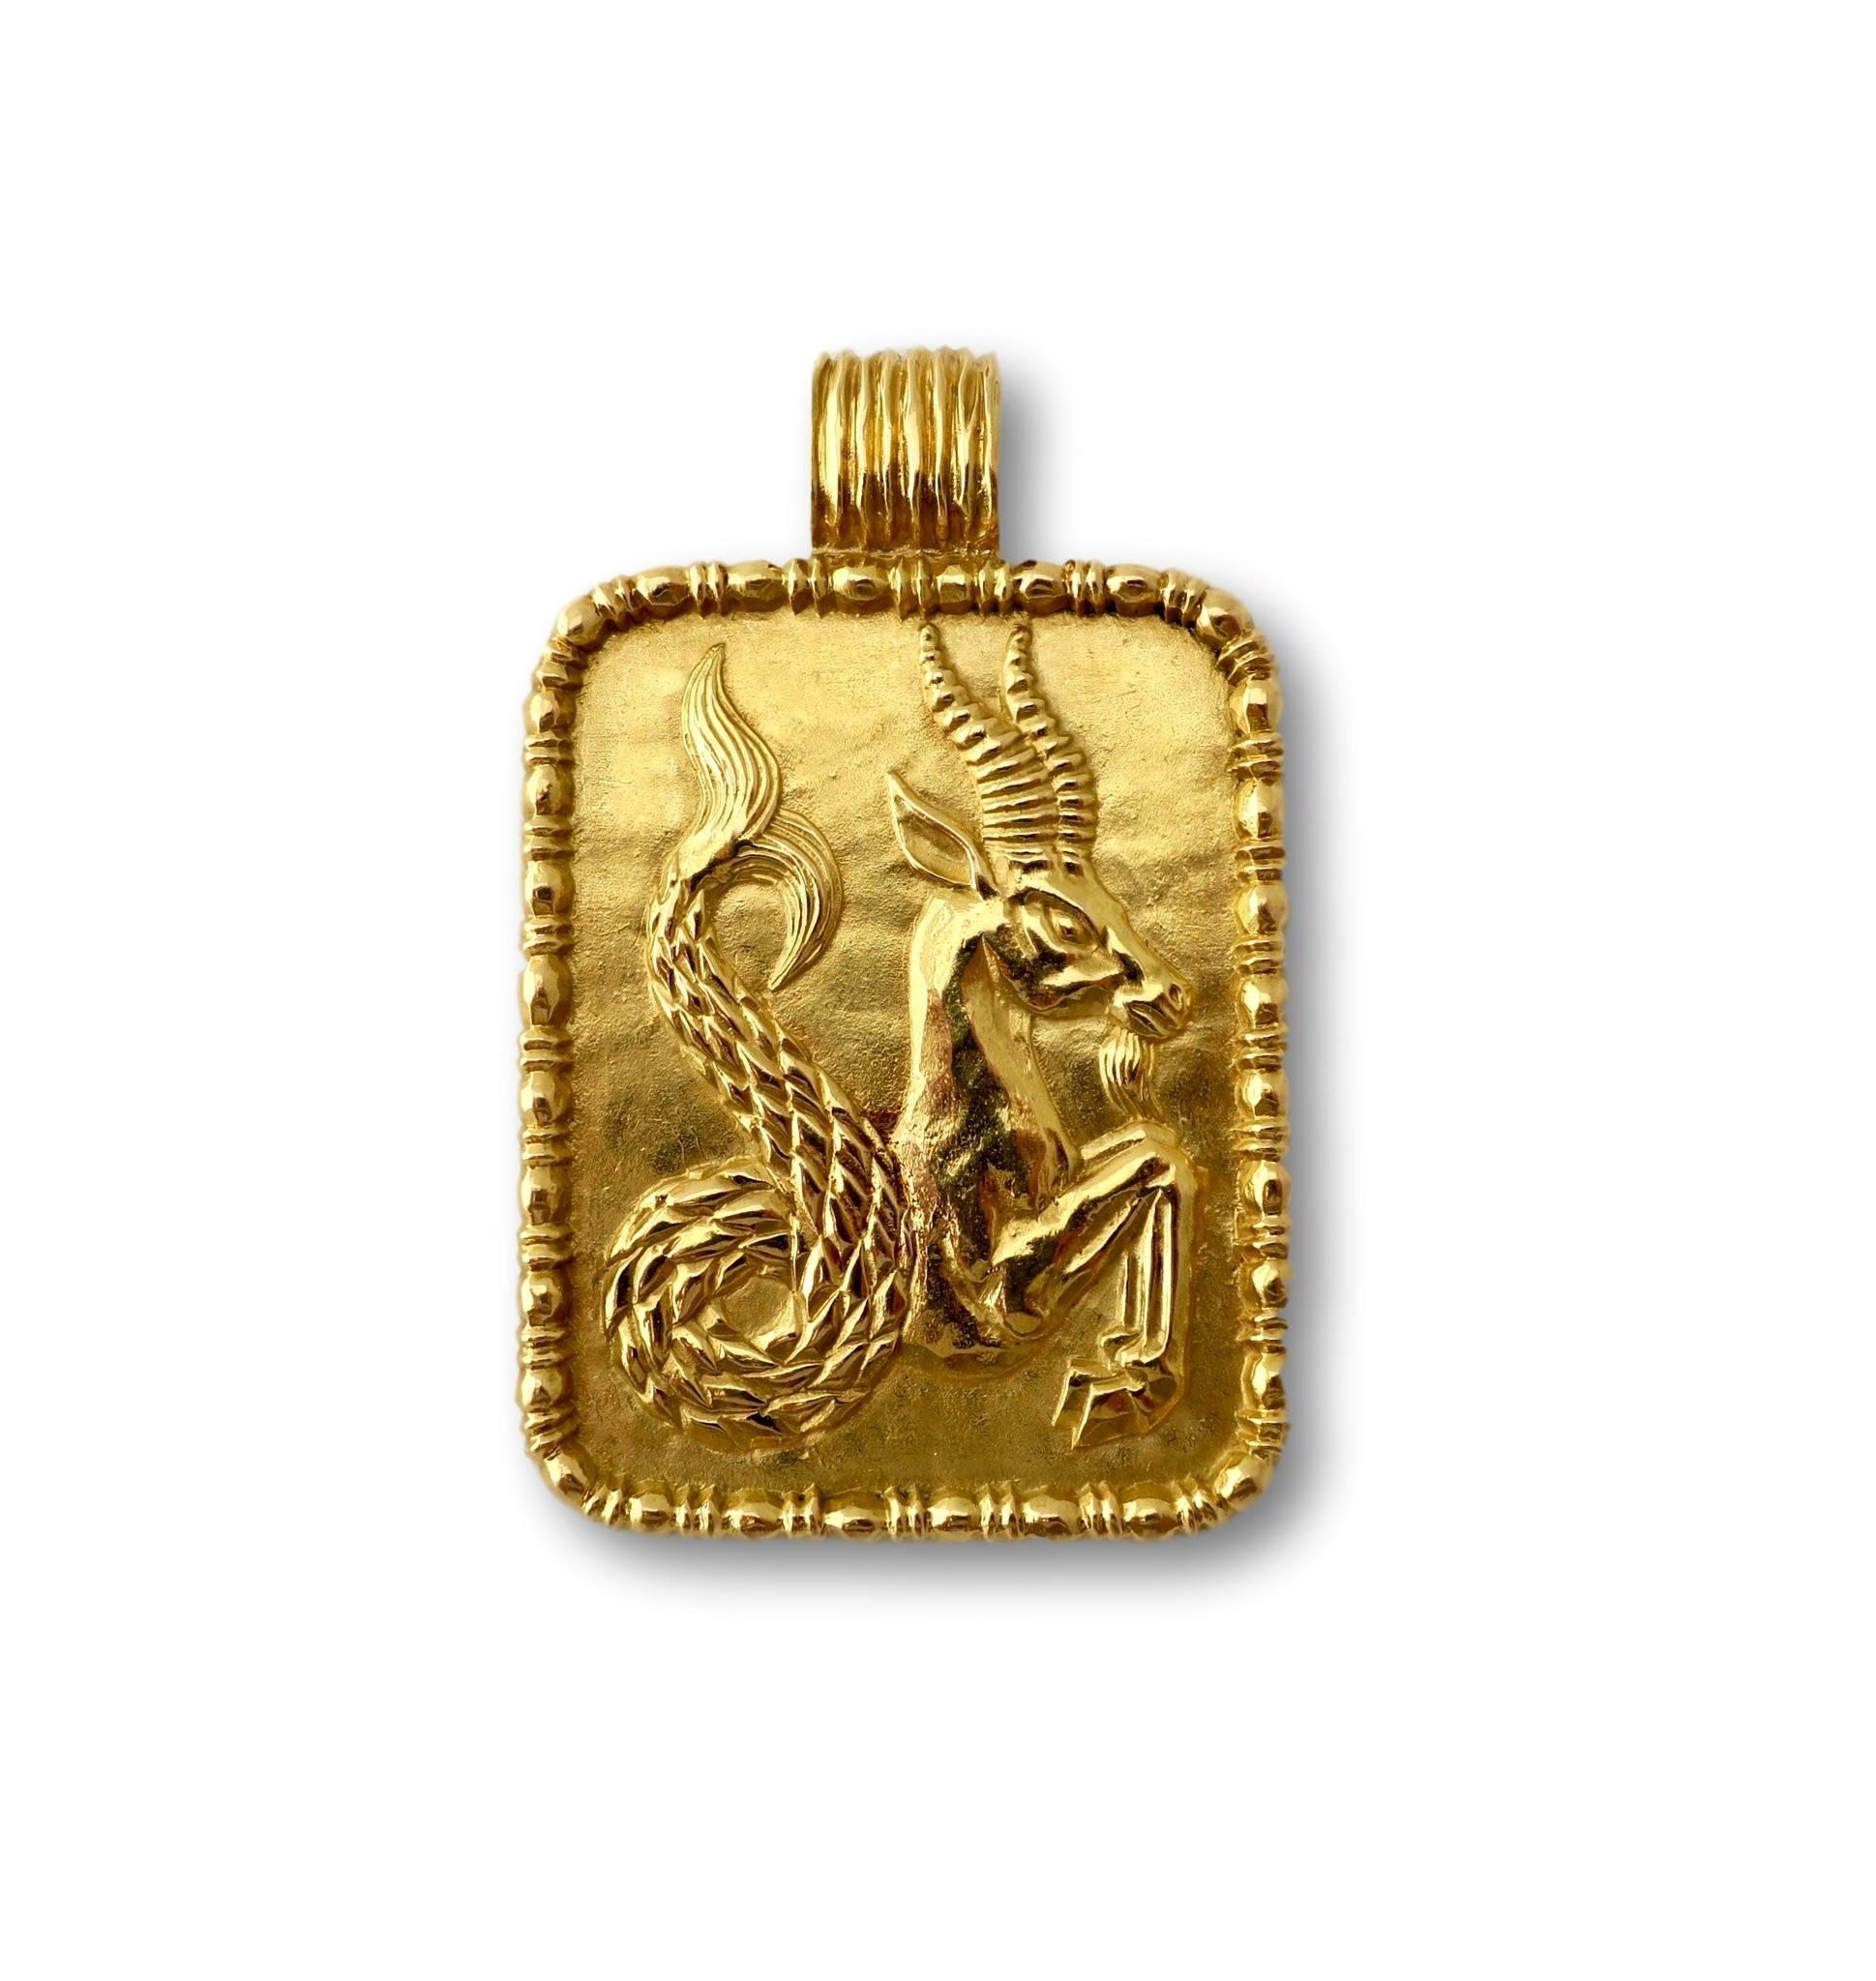 Capricorn pendant by Fred of Paris. A  Large sized  2 1/8